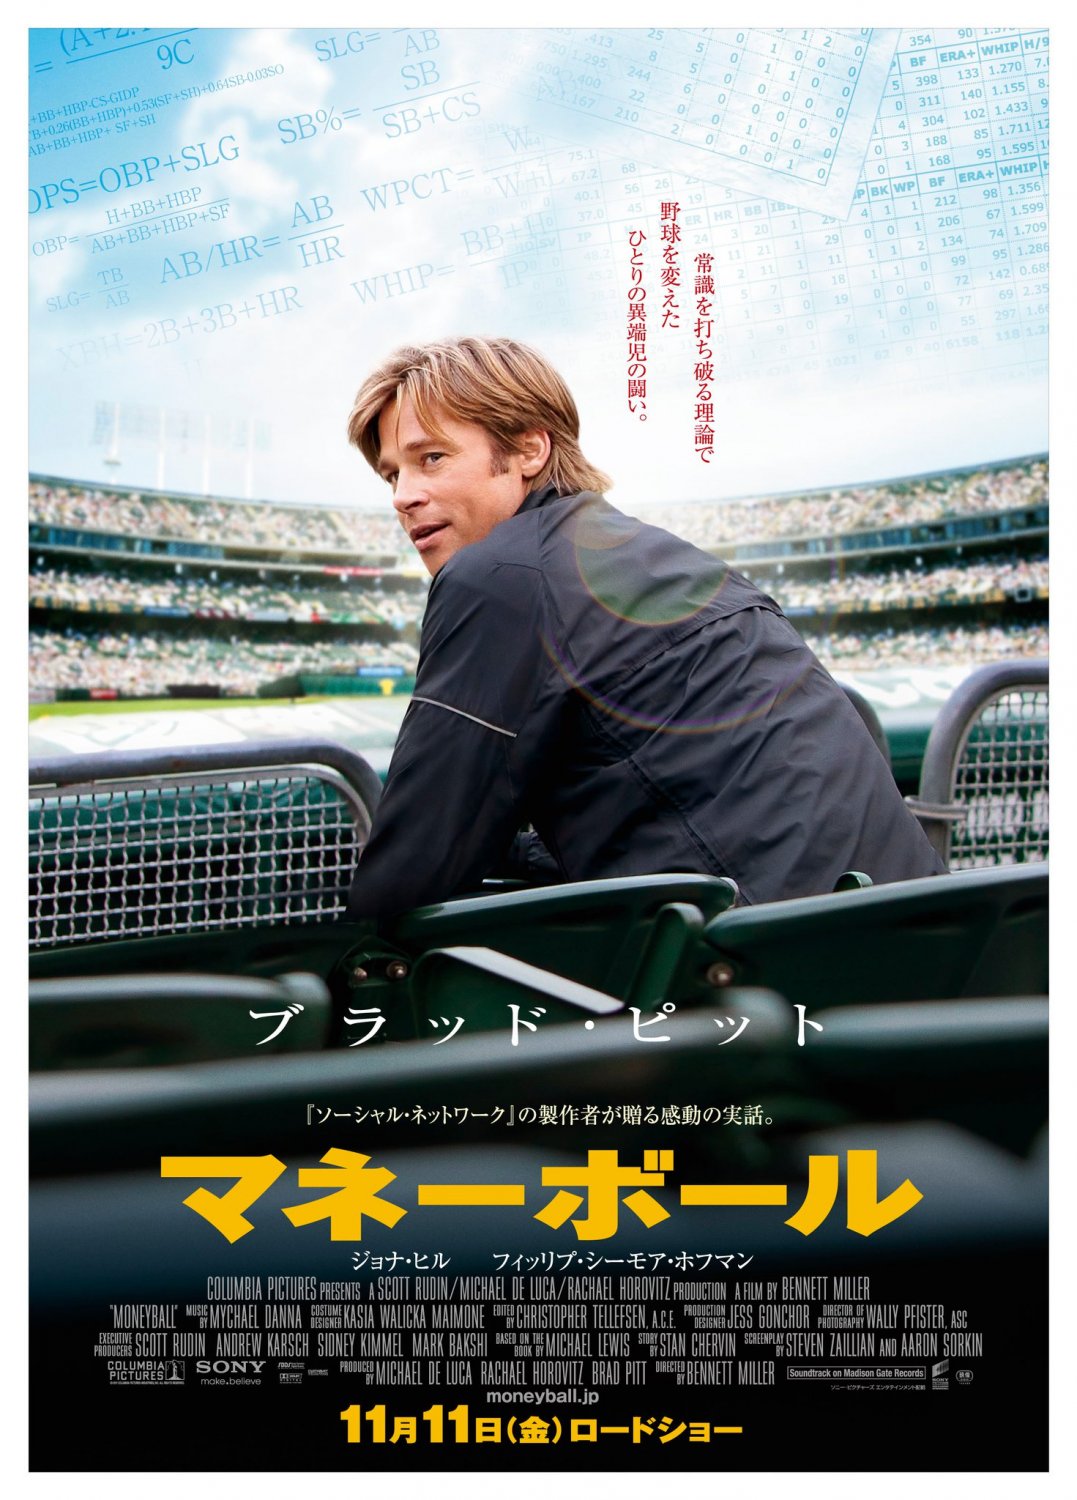 Extra Large Movie Poster Image for Moneyball (#3 of 4)